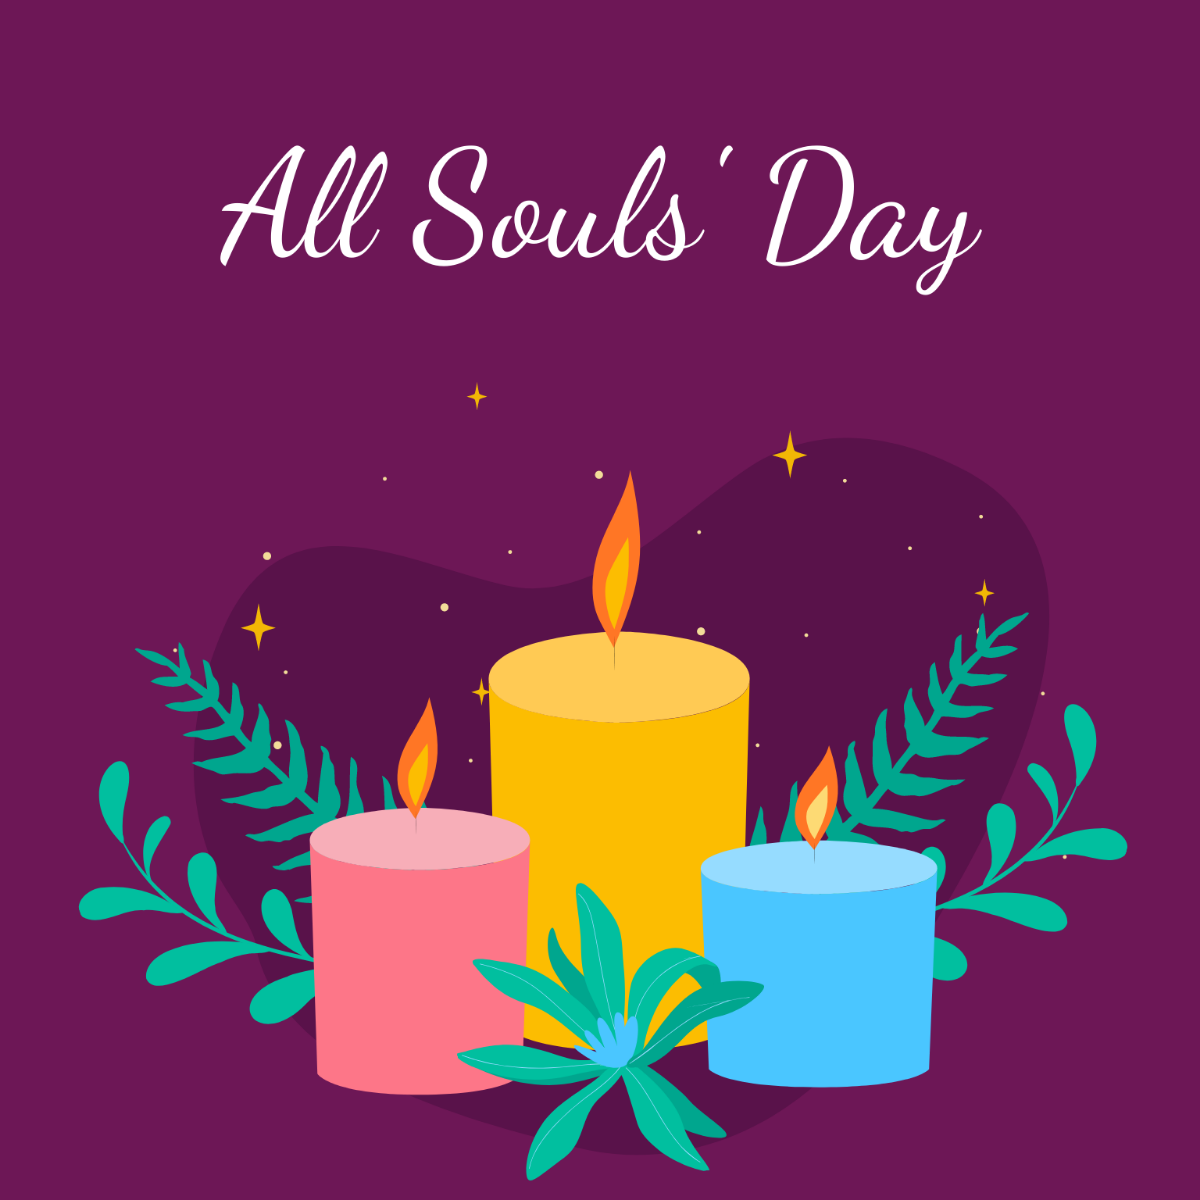 Free All Souls' Day Illustration Template